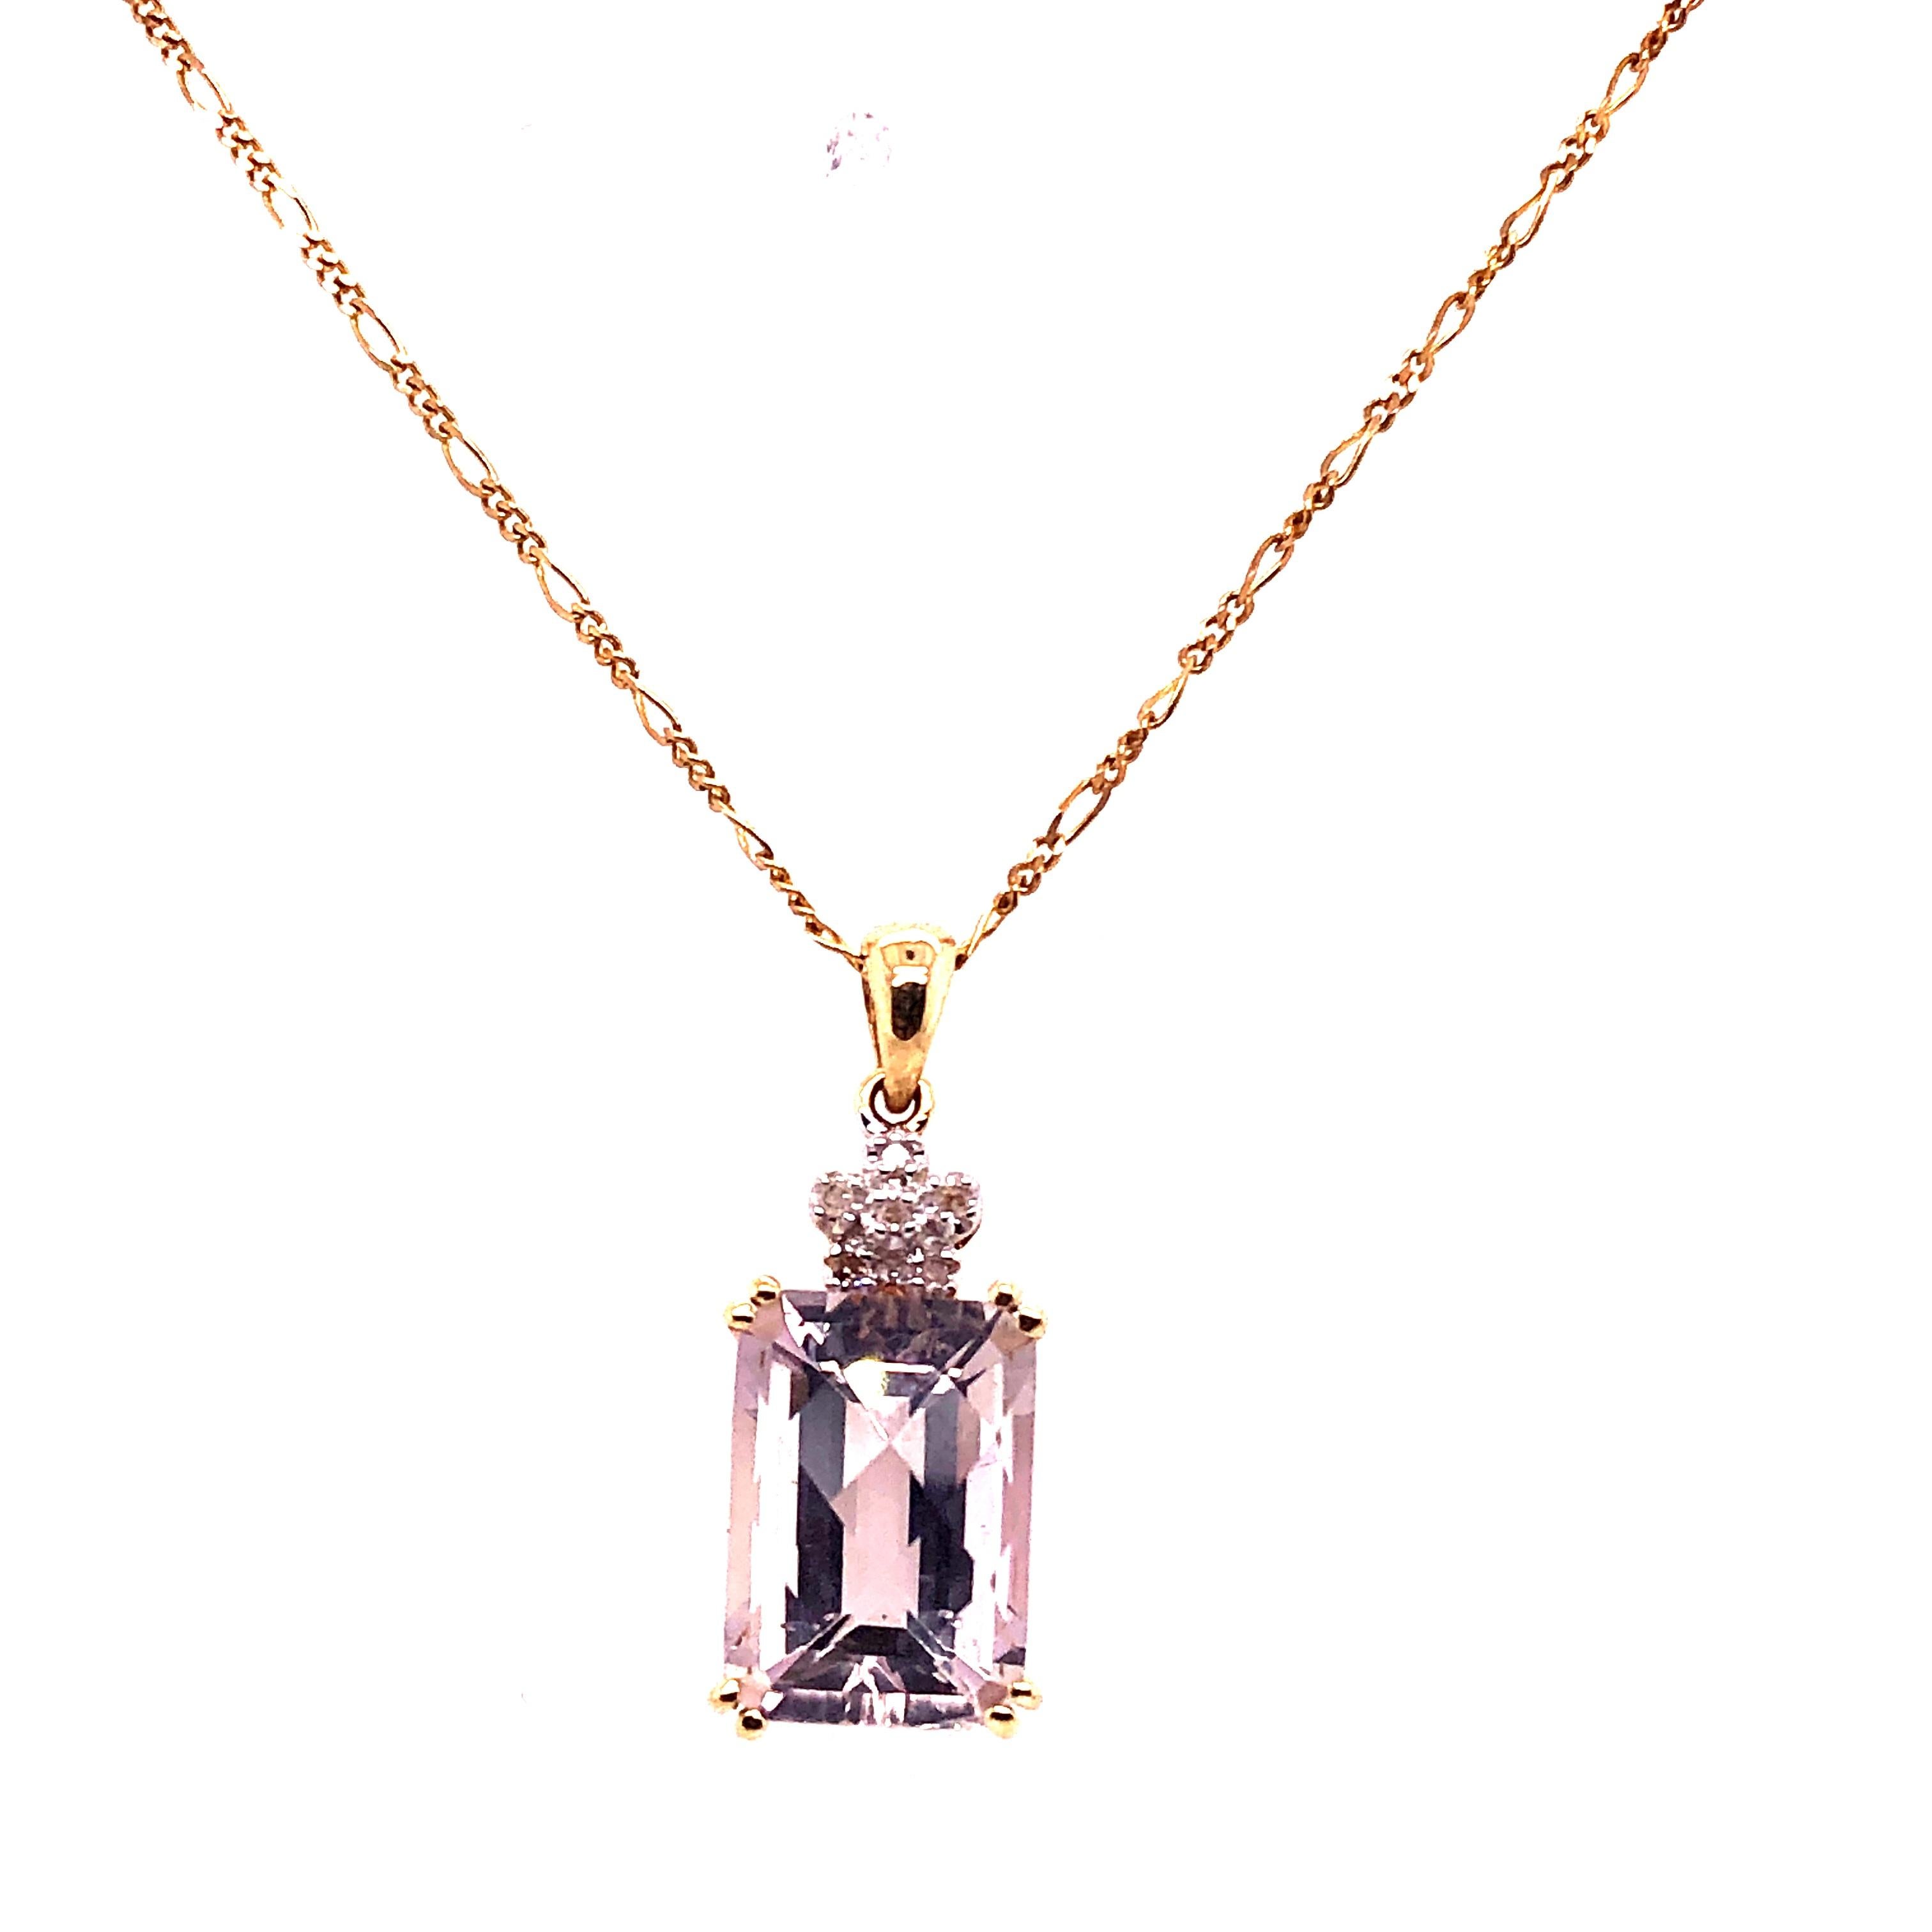 14 Karat Yellow Gold 16 Inch Necklace with Semi Precious Stone Pendant. Stone believed to be Morganite. Stamped 585. 14 Karat Italy Made. 5.25 grams total weight. Stone is 11mm by 14mm. 
Morganite is the pink to orange-pink variety of beryl, a